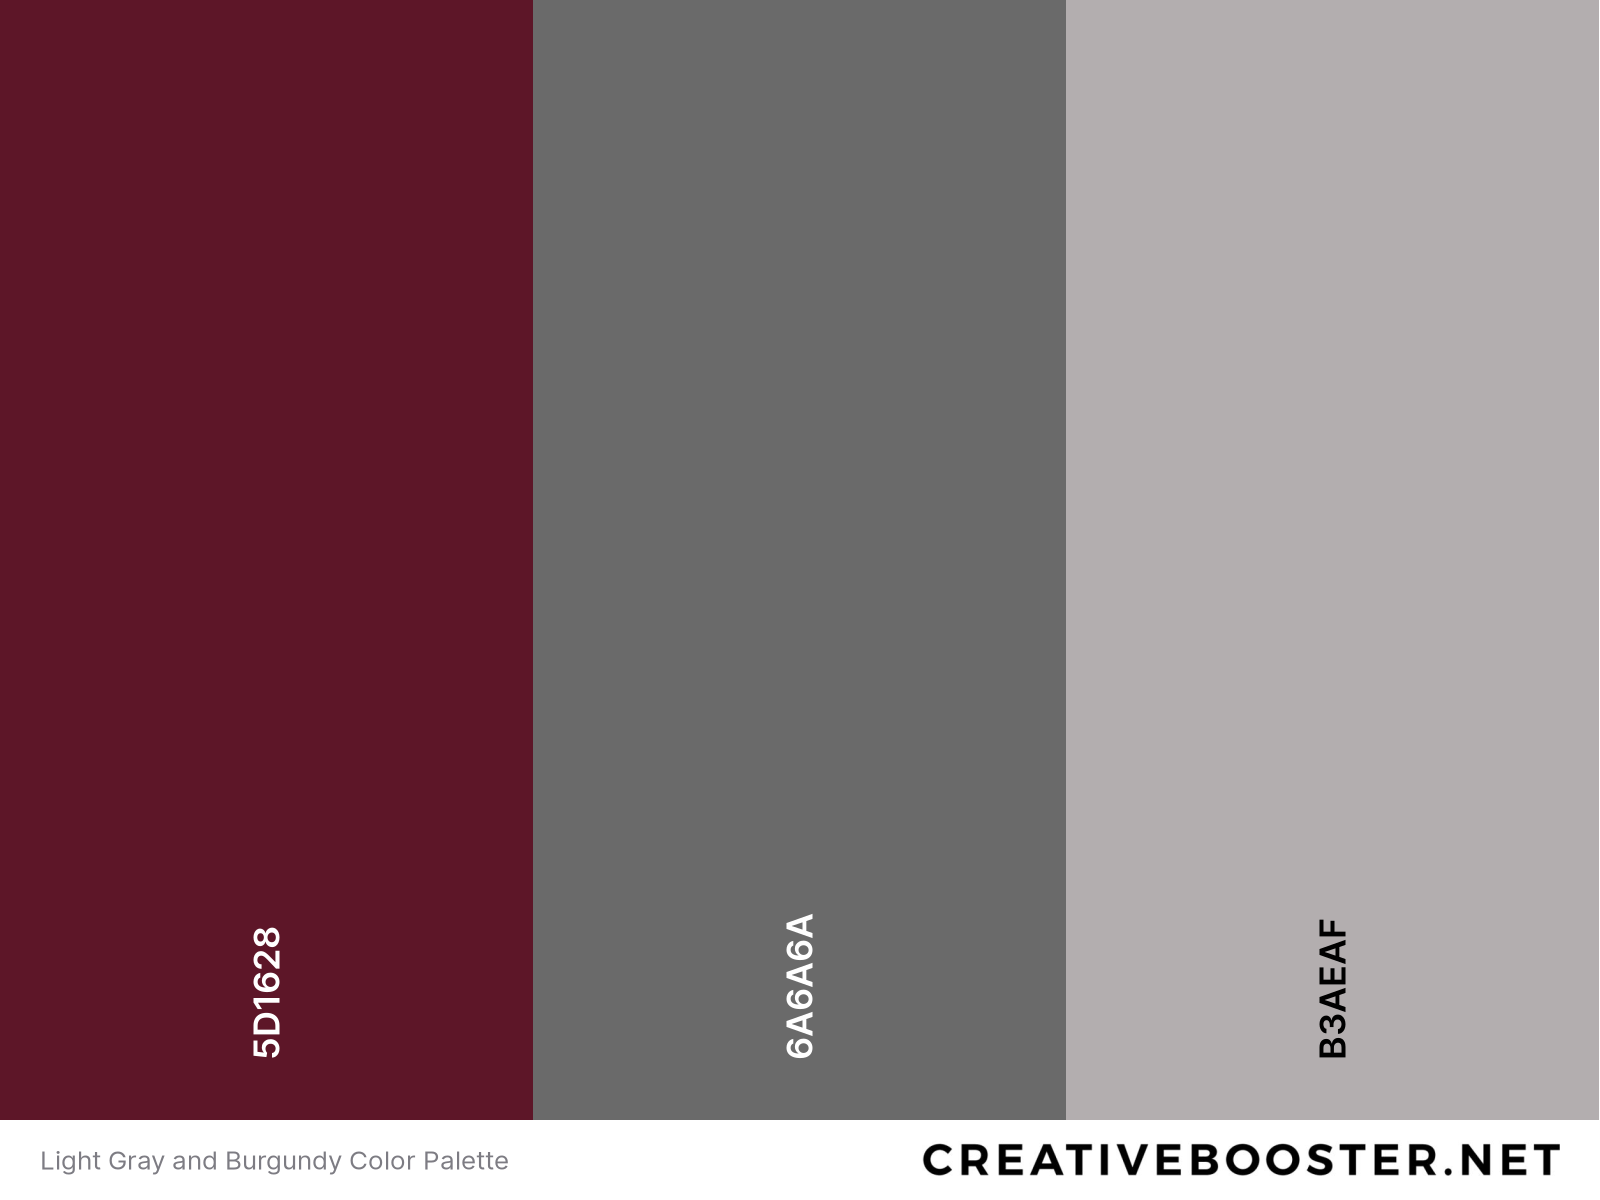 Light Gray and Burgundy Color Palette